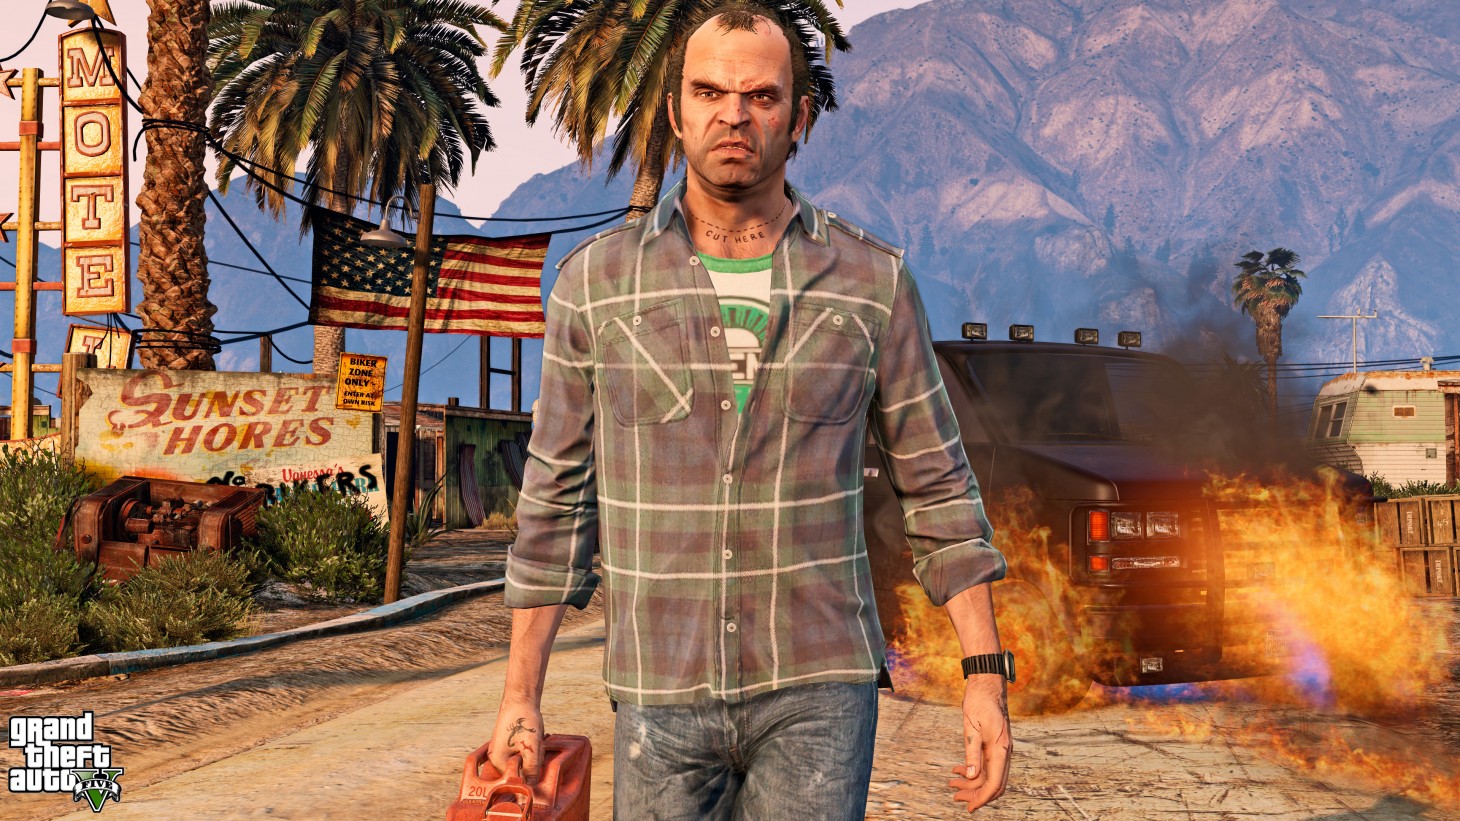 GTA 3: Definitive Edition - 10 Things You NEED TO KNOW  Grand Theft Auto 3  - The Definitive Edition (PC, PS5, PS4, Xbox Series X/S/One, Nintendo  Switch) is returning via the